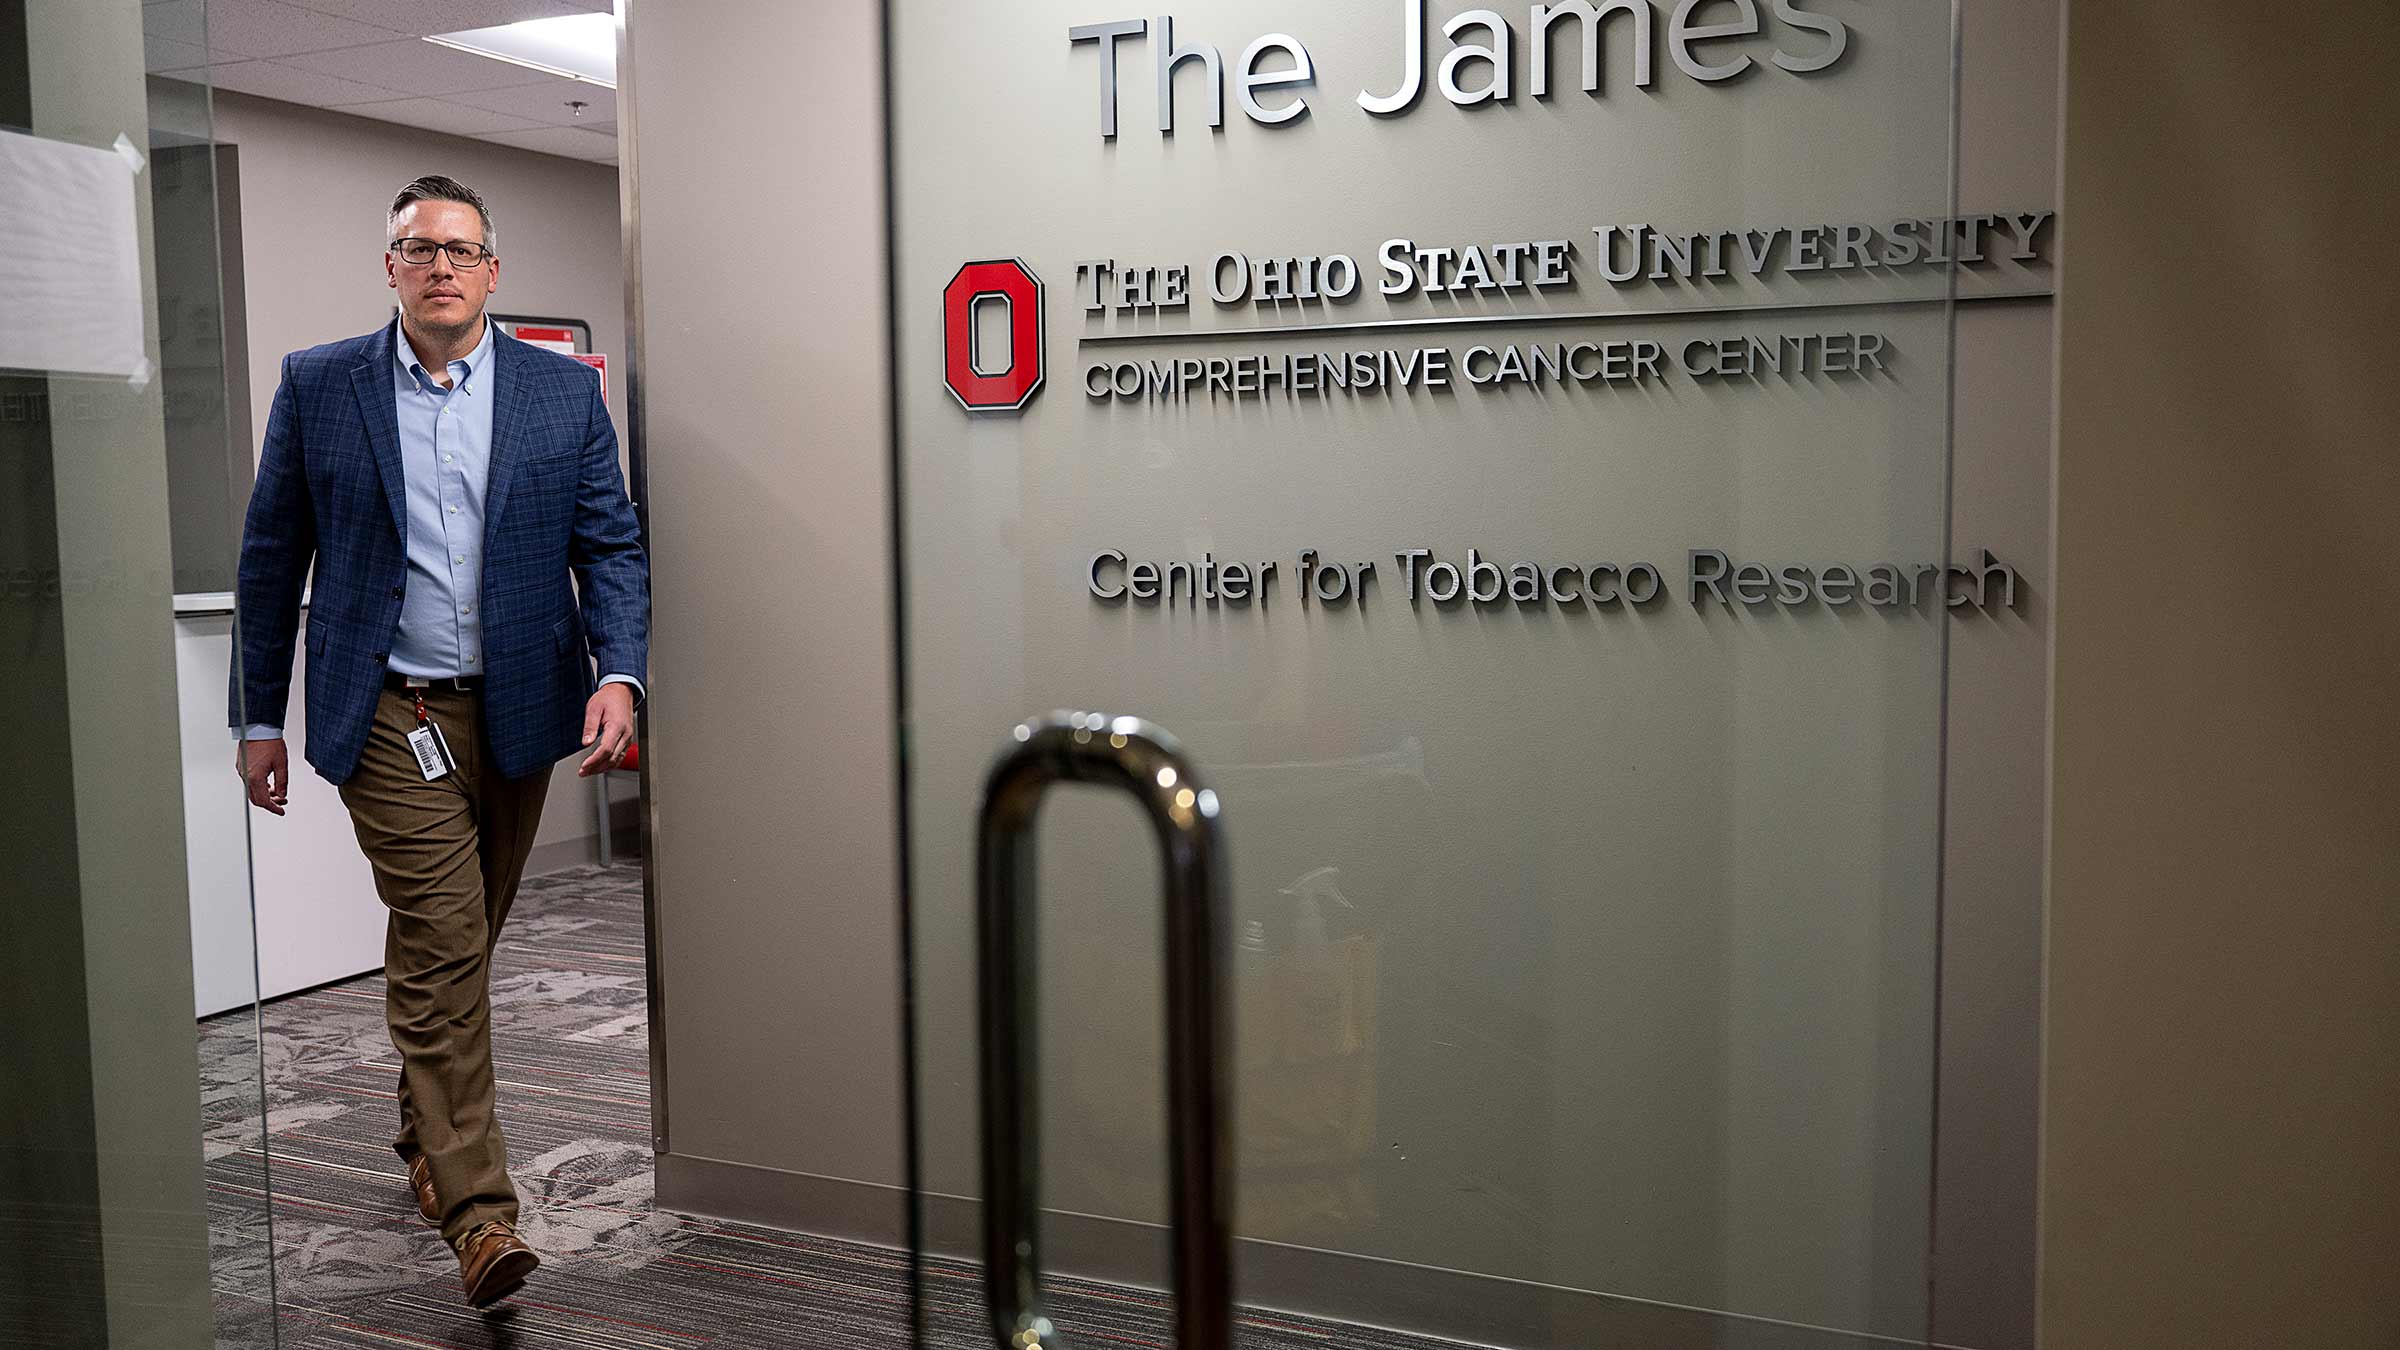 Dr. Theodore Wagner at the entrance of the center for Tobacco Research